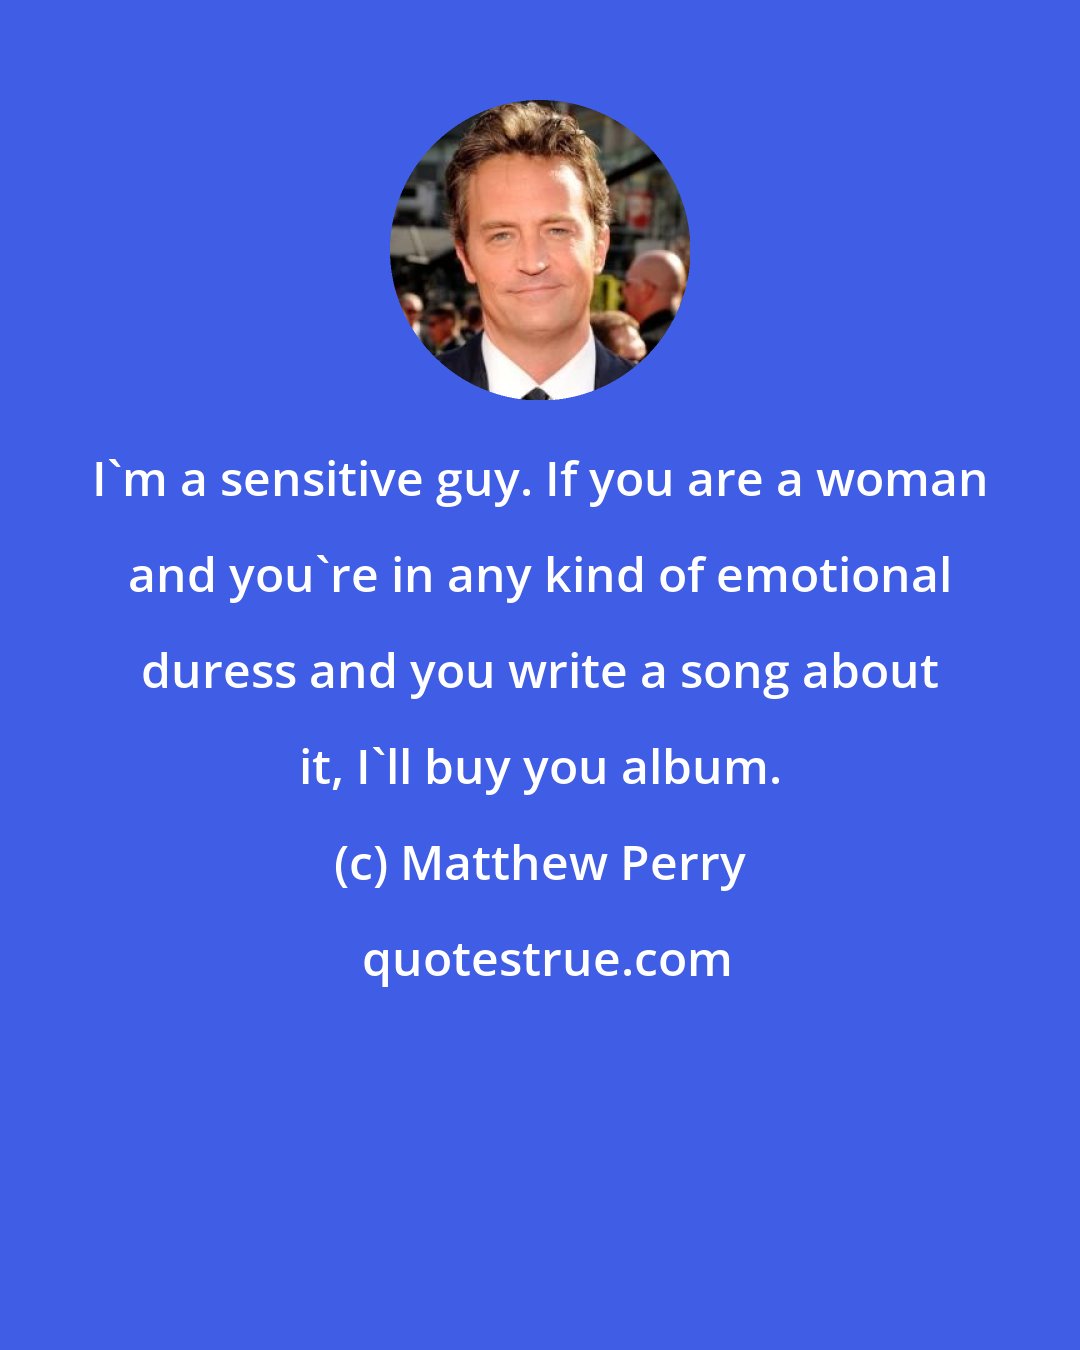 Matthew Perry: I'm a sensitive guy. If you are a woman and you're in any kind of emotional duress and you write a song about it, I'll buy you album.